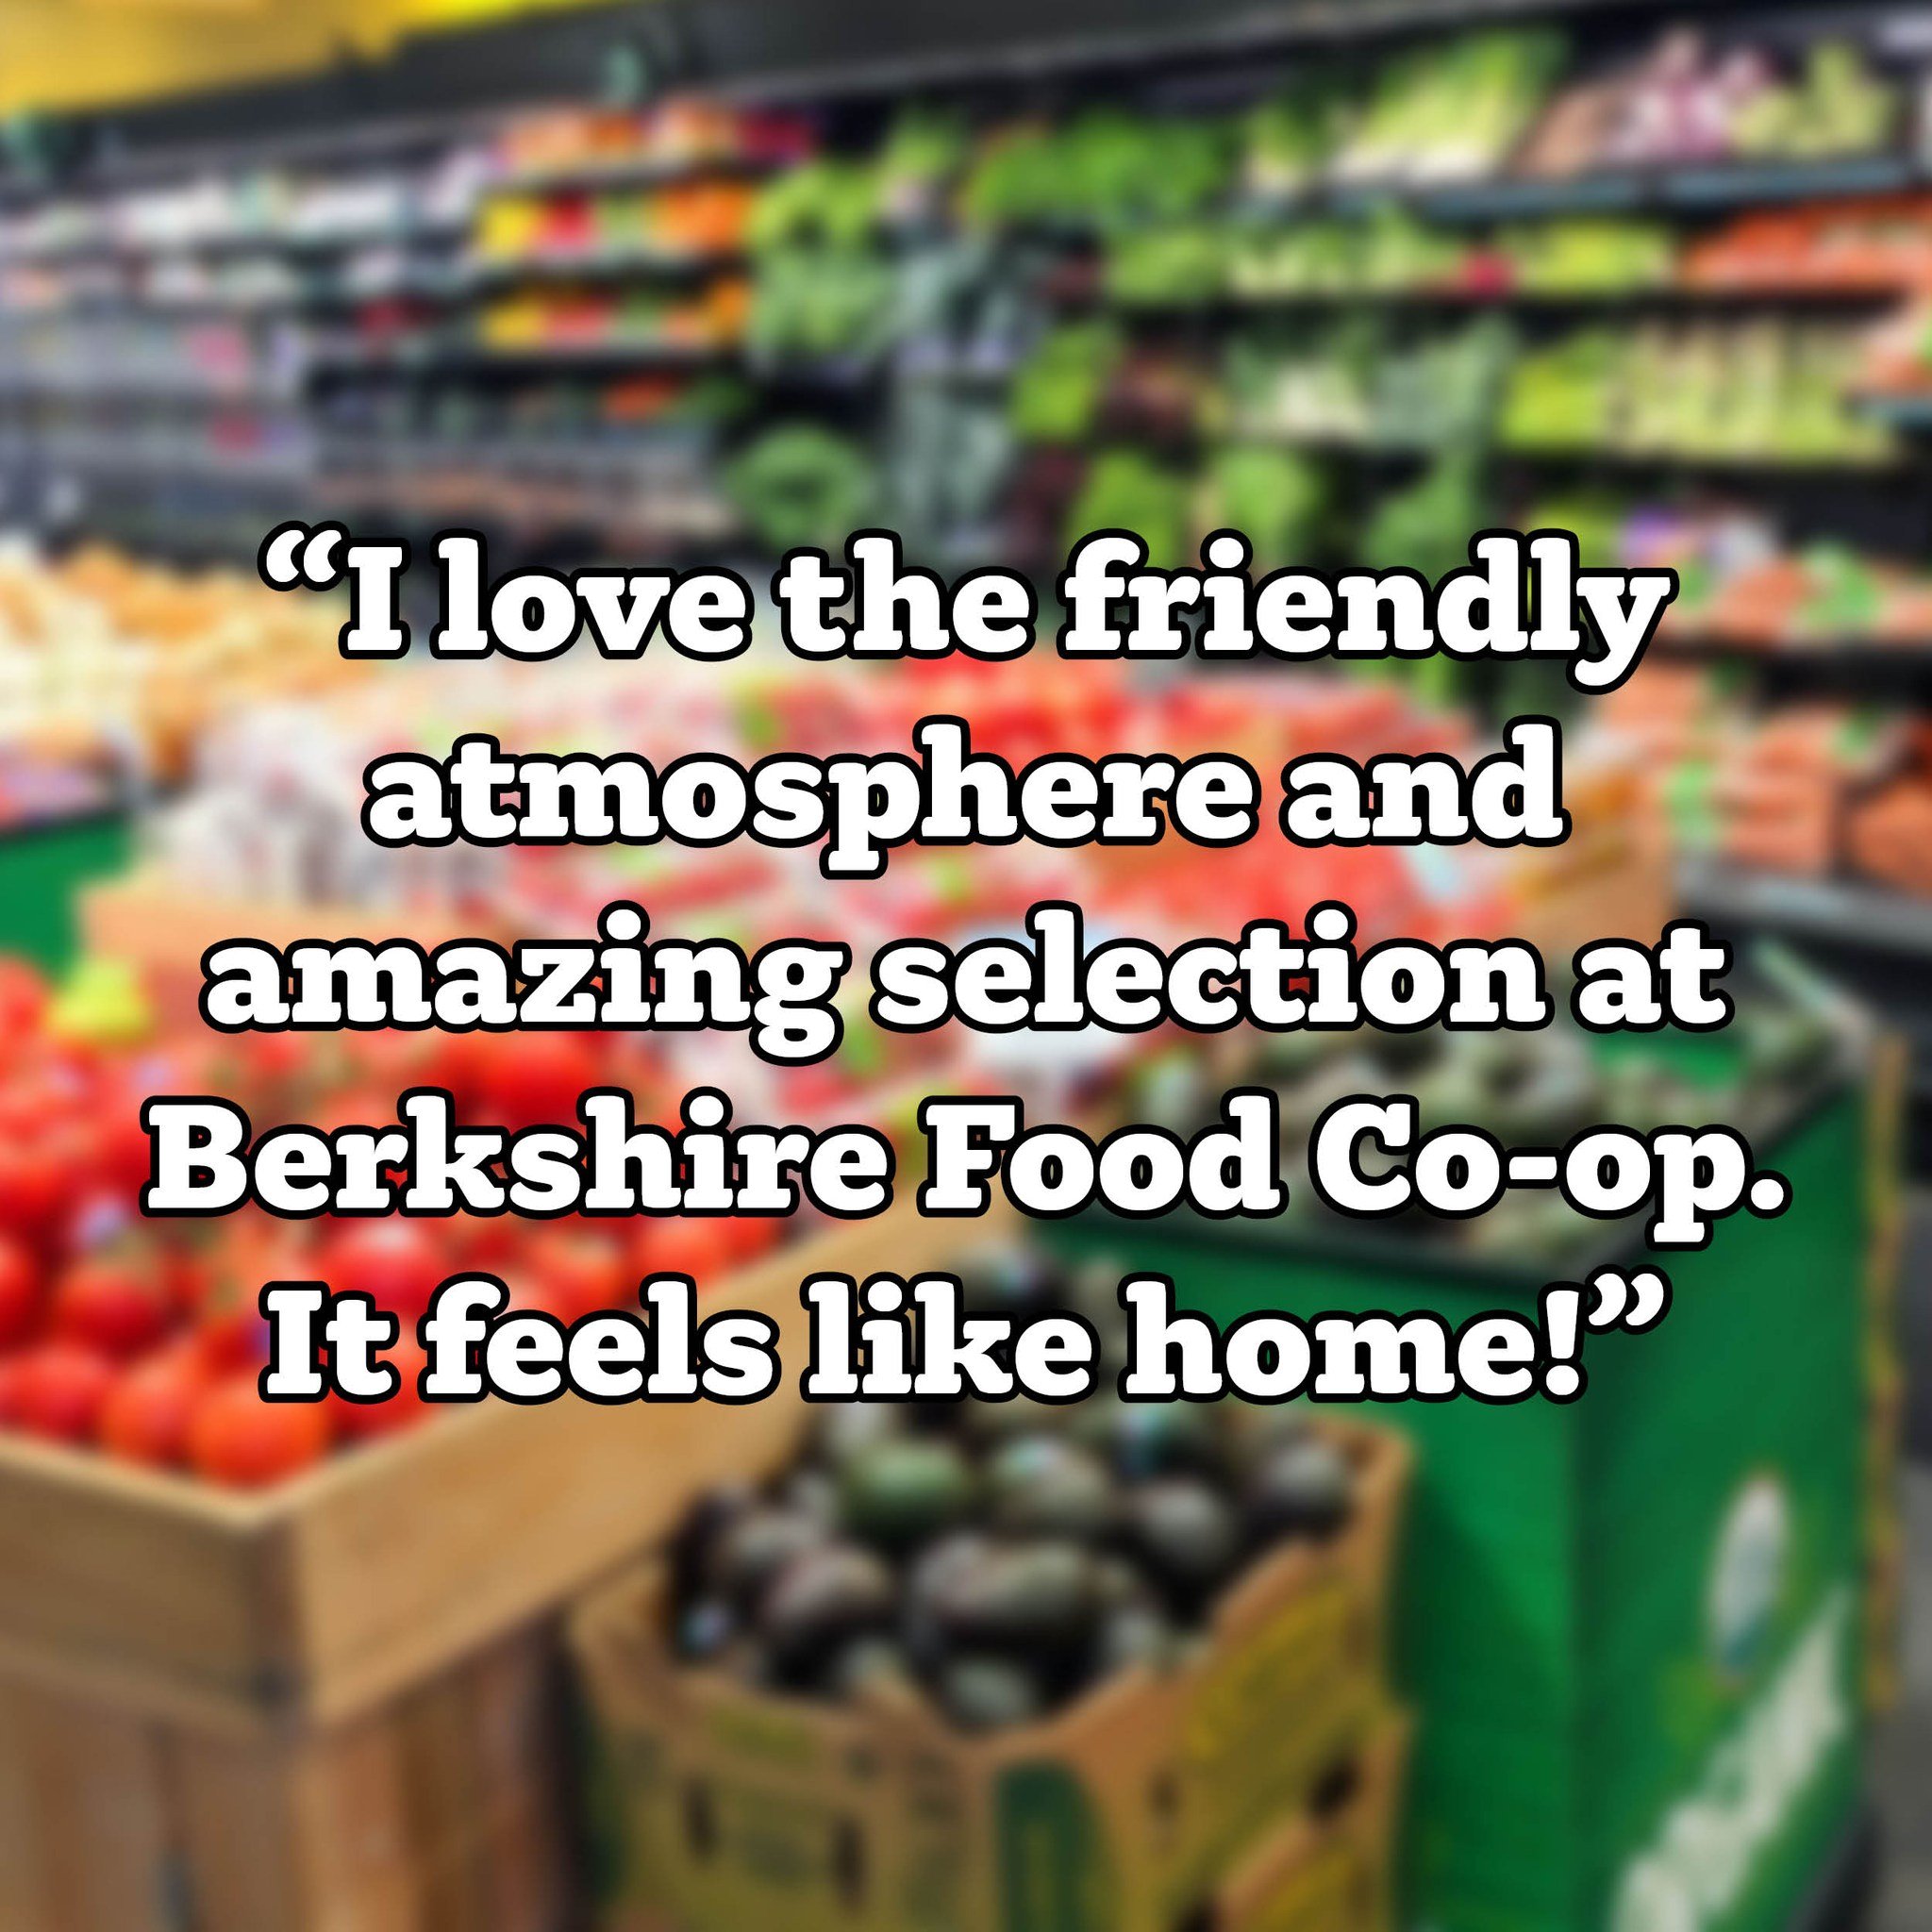 🎉 Customer testimonial: &quot;I love the friendly atmosphere and amazing selection at Berkshire Food Co-op. It feels like home!&quot; 🌟